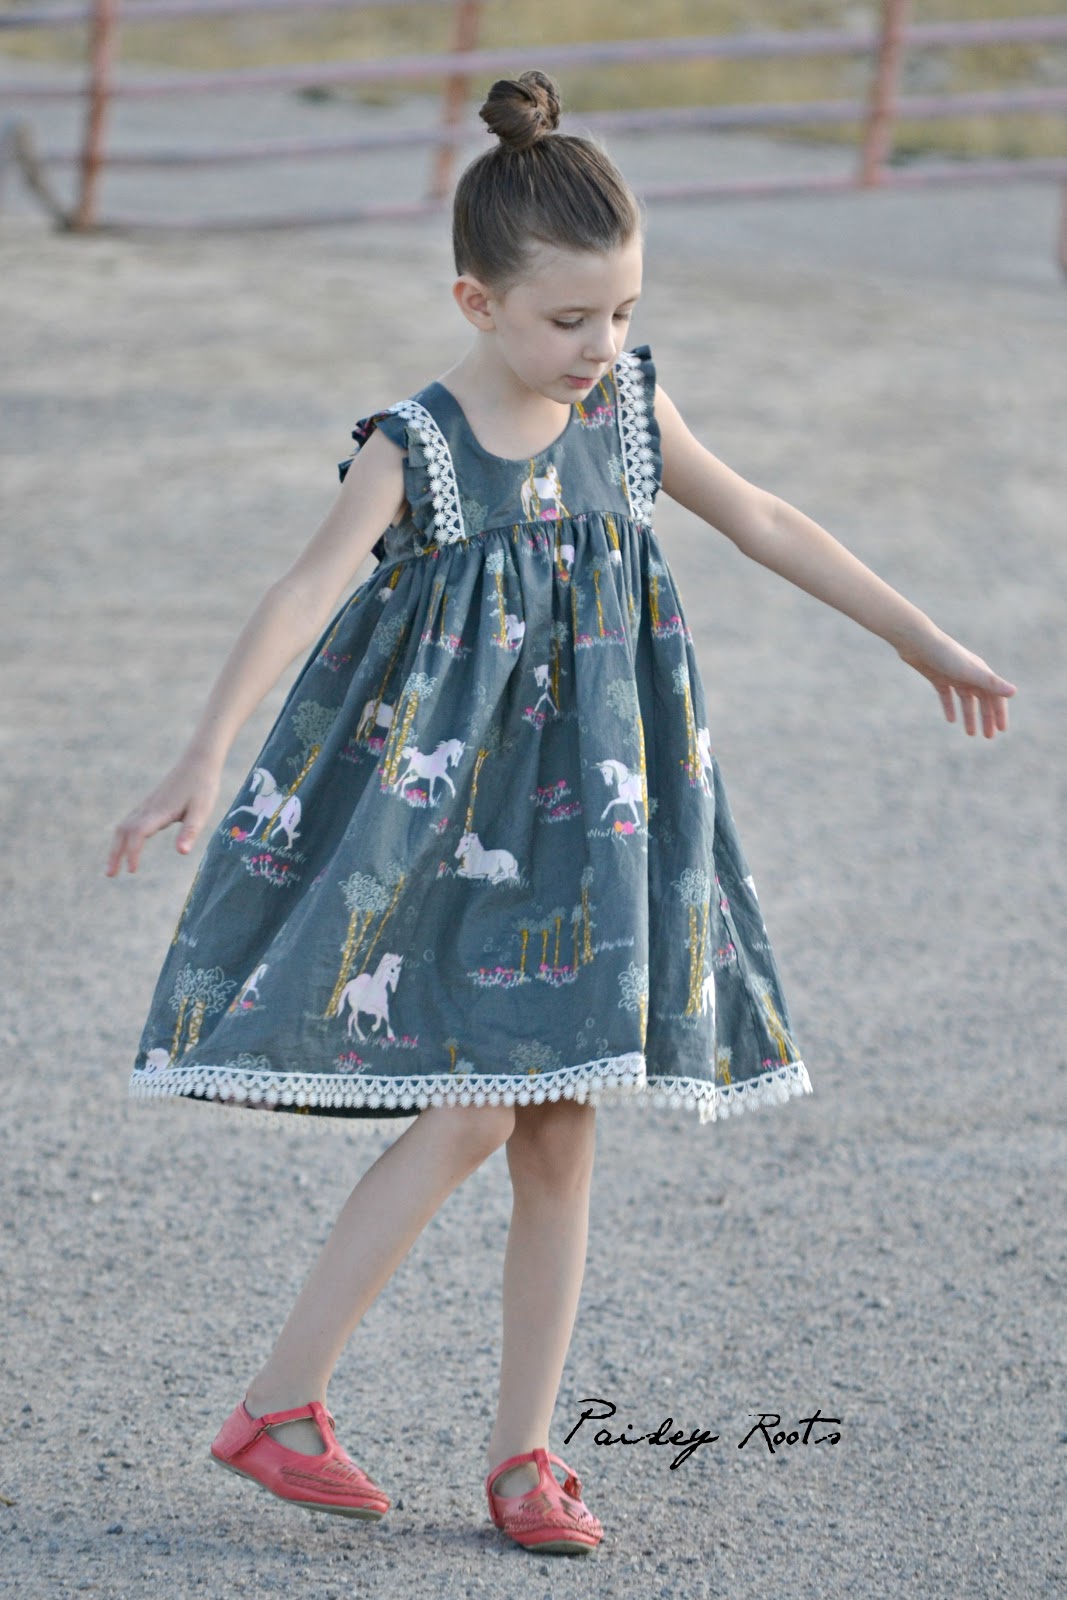 Paisley Roots: Sewing For Kindergarten 2015